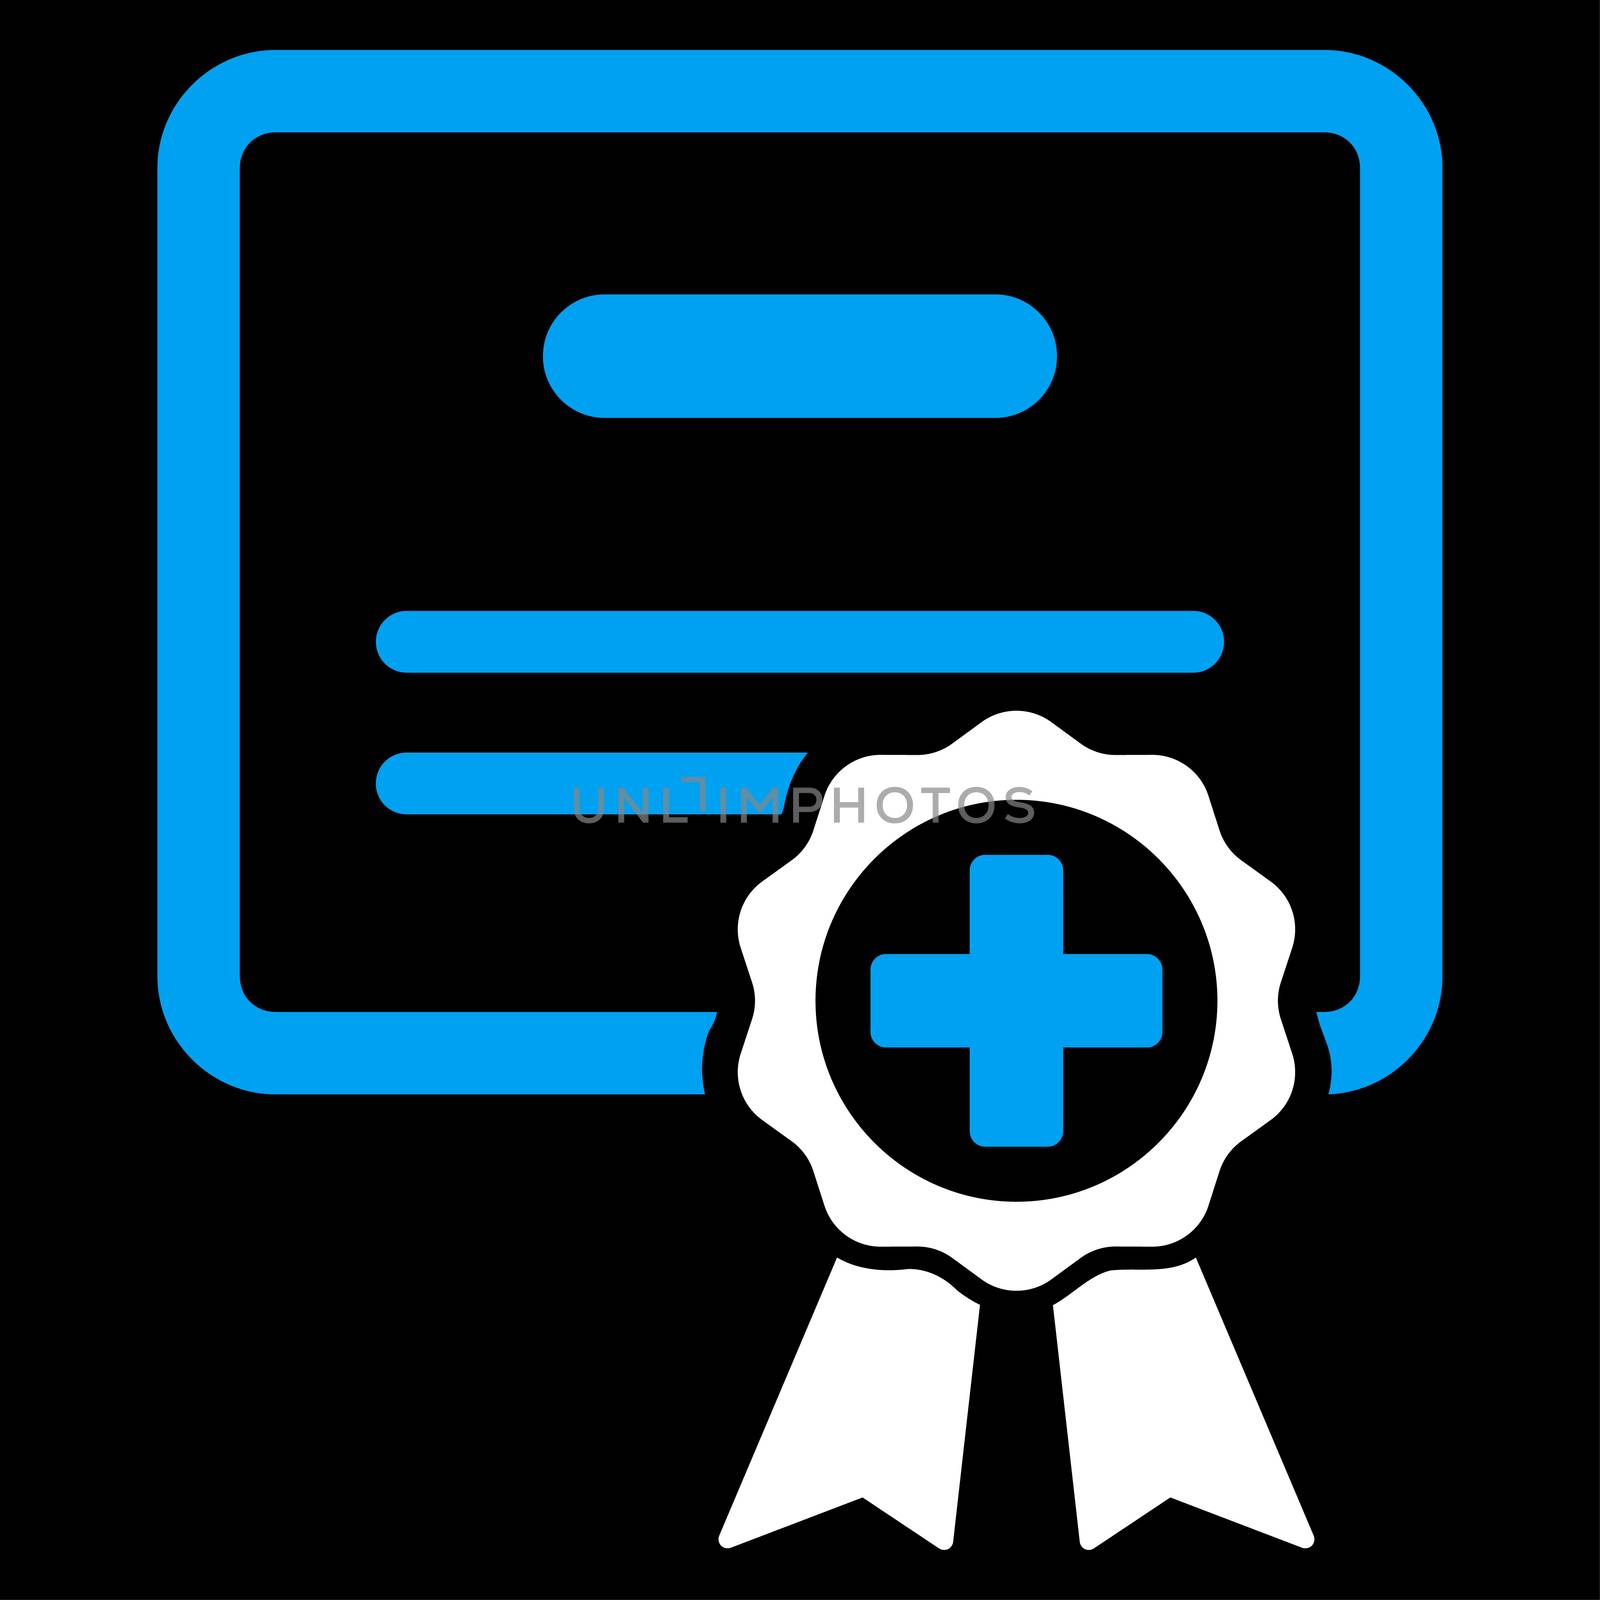 Medical Certificate raster icon. Style is bicolor flat symbol, blue and white colors, rounded angles, black background.